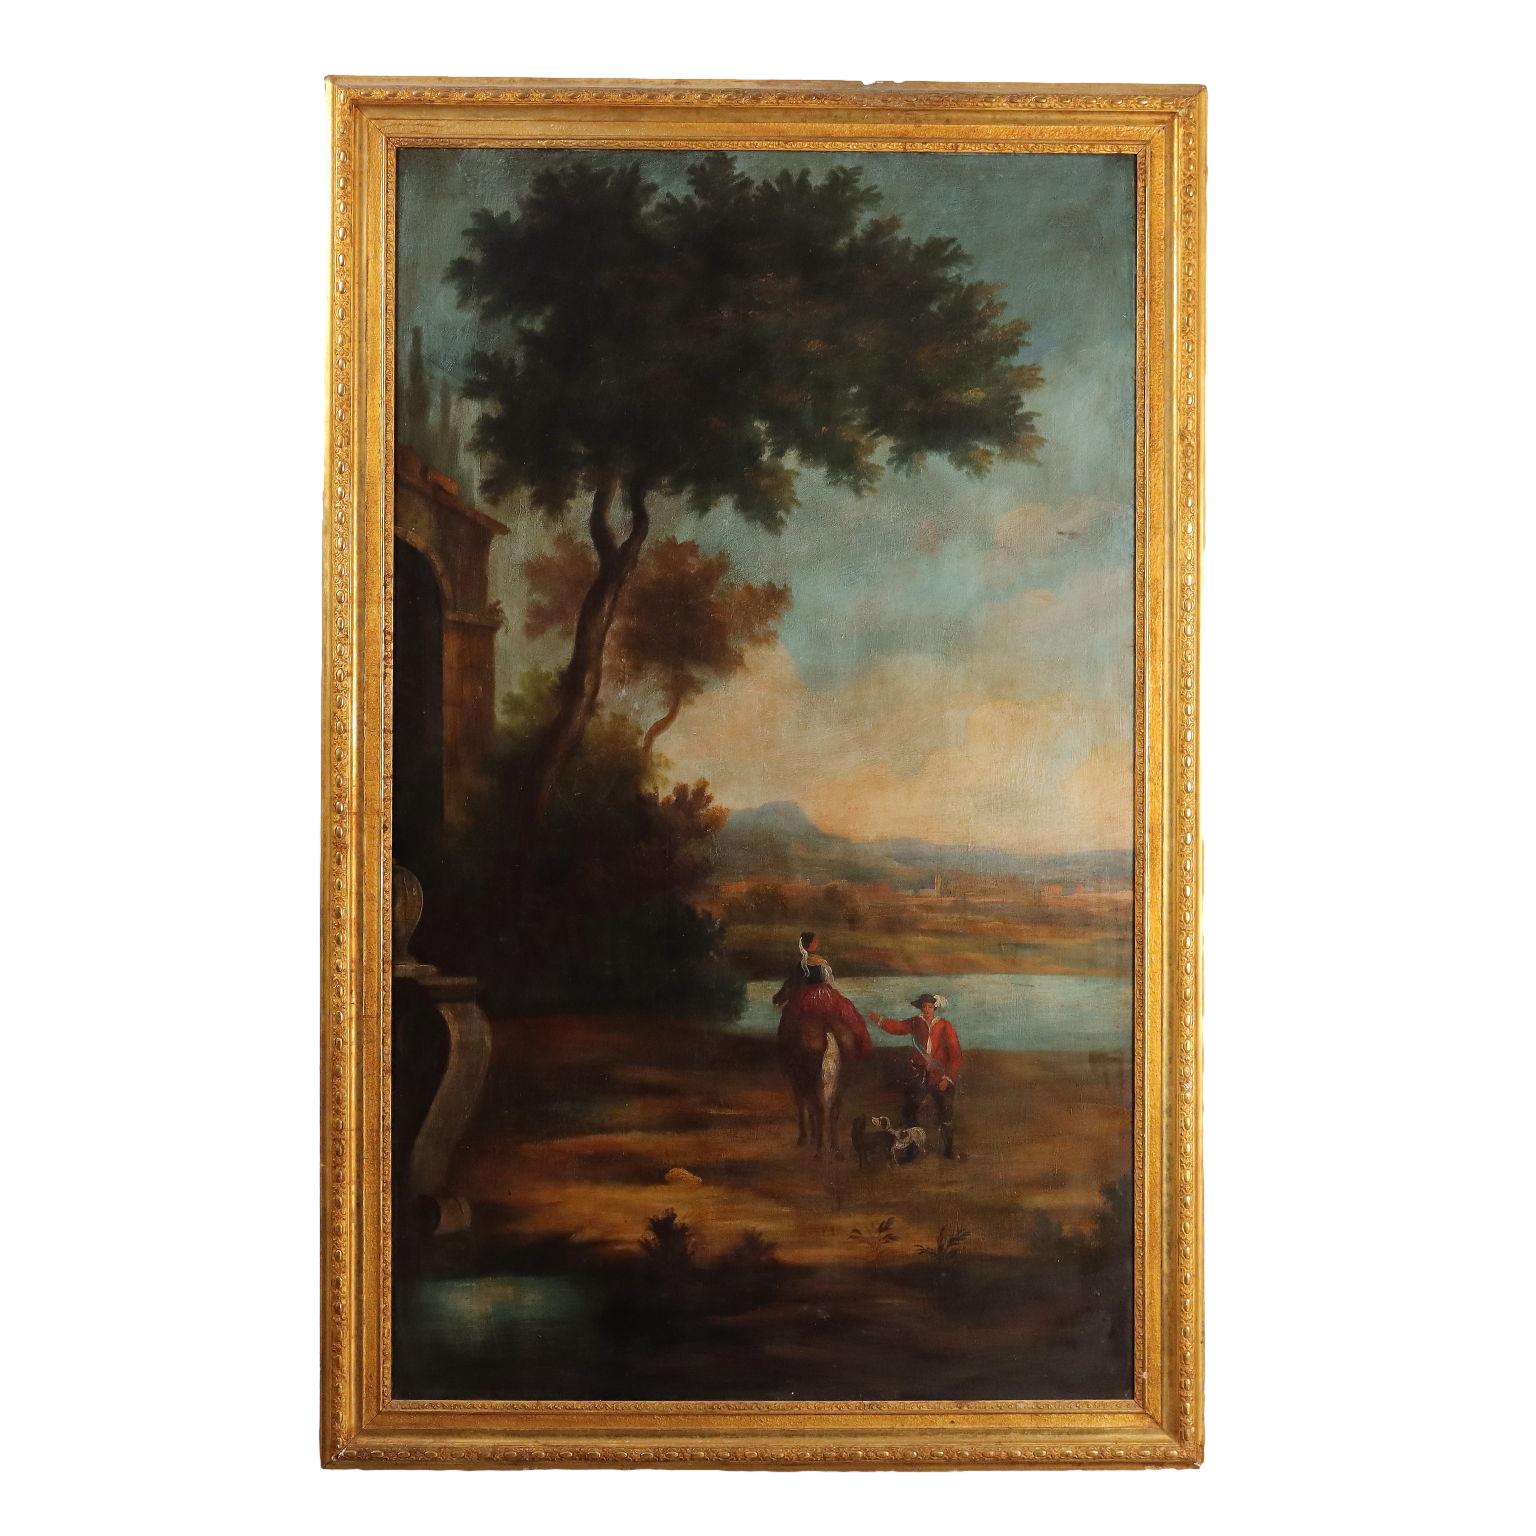 Unknown Landscape Painting - Painting Large Landscape with Figures 1931